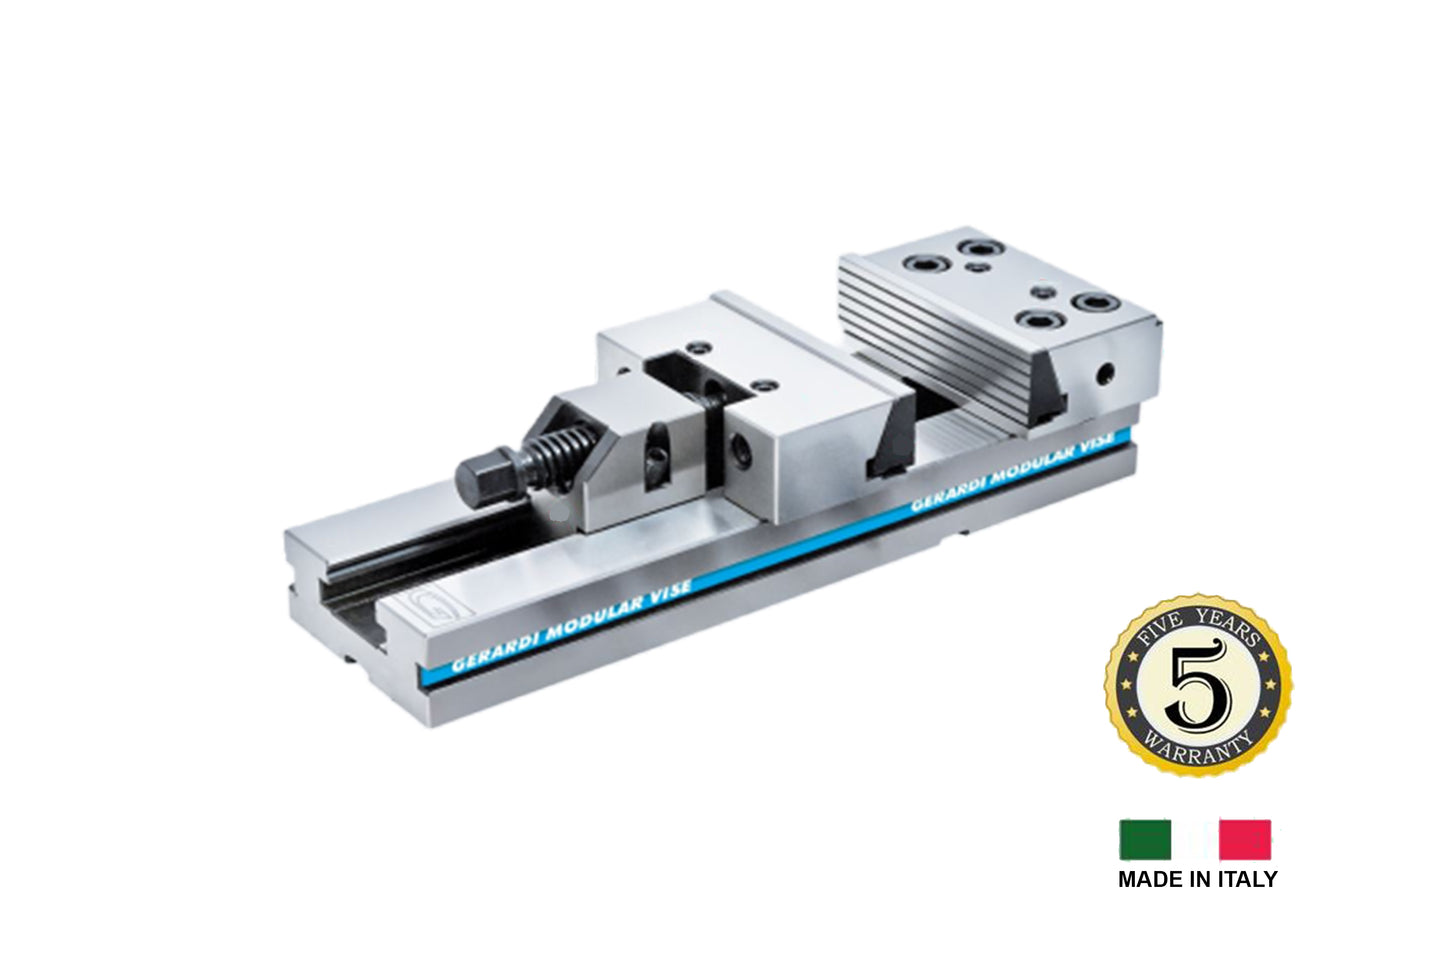 Gerardi Standard Precision Modular Vice with Solid Guided Movable Jaw (Width = 125mm, Opening = 150mm)